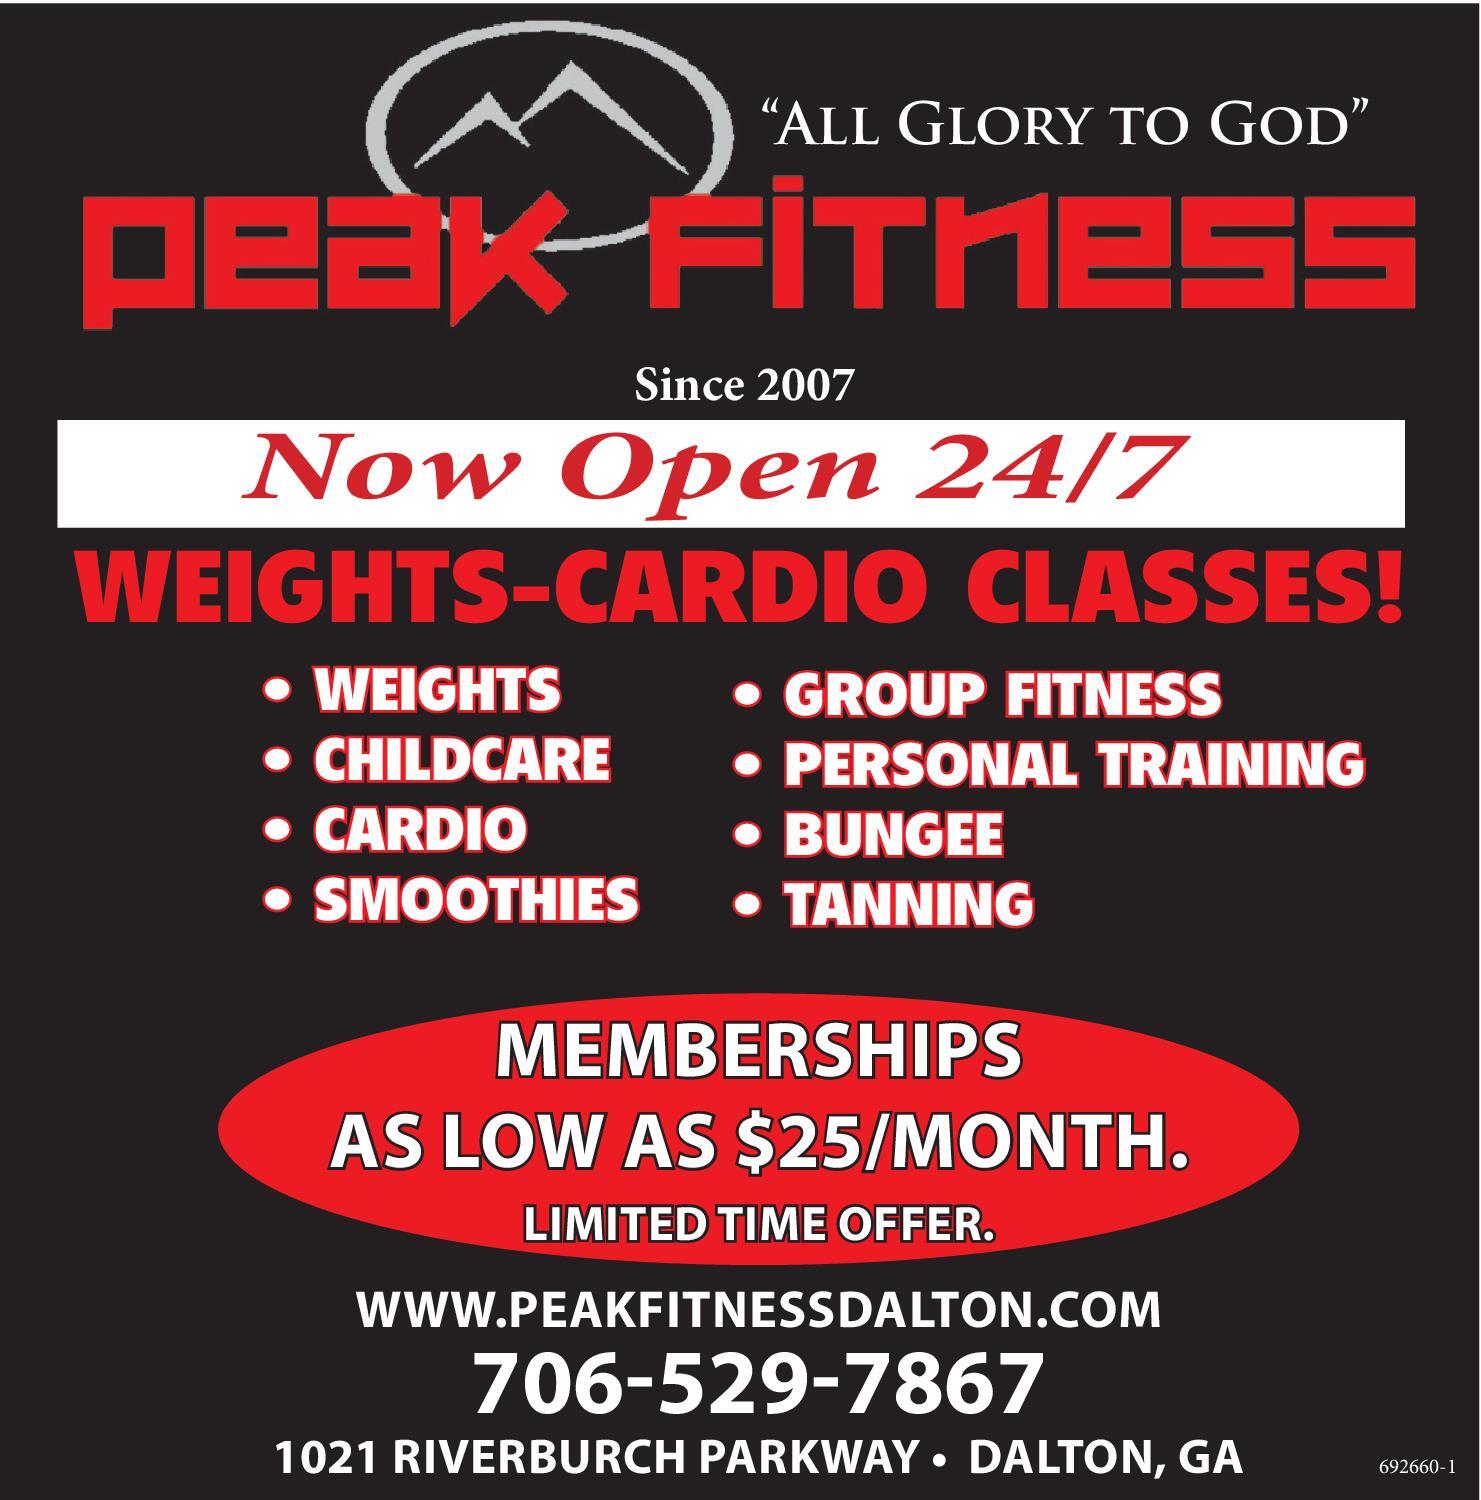 The Daily Citizen | Newspaper Ads | Classifieds | Recreation |  WEIGHTS-CARDIO CLASSES!